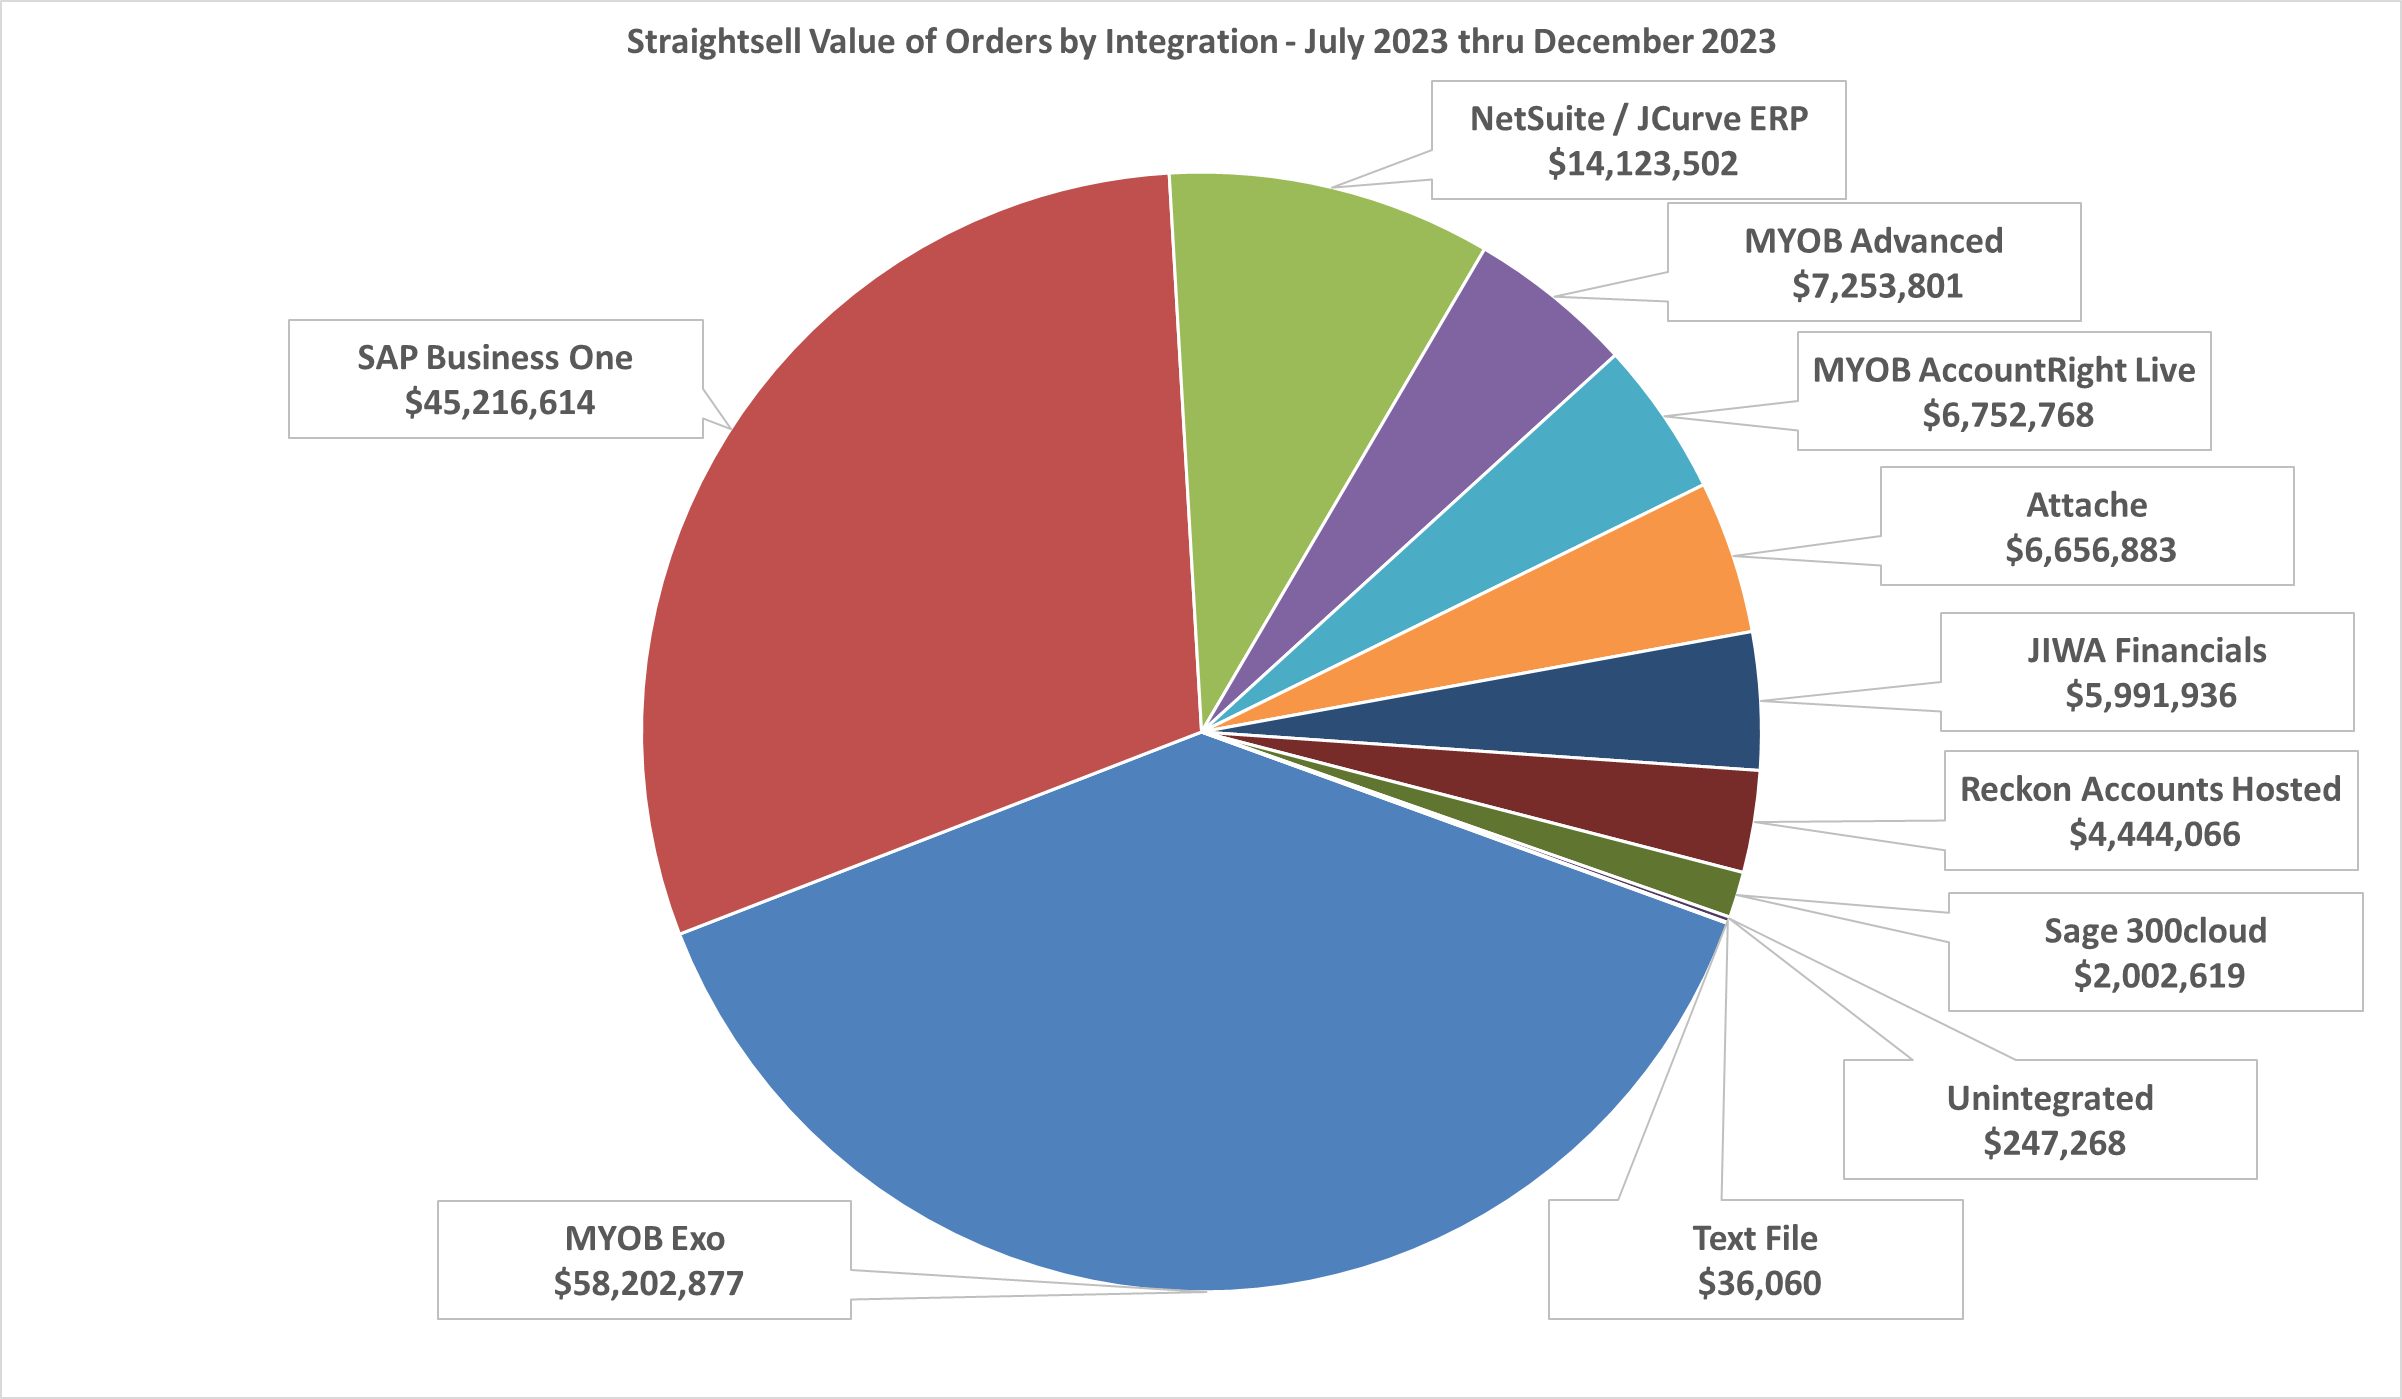 Straightsell Value of Orders by Integration - July 2023 thru June 2024